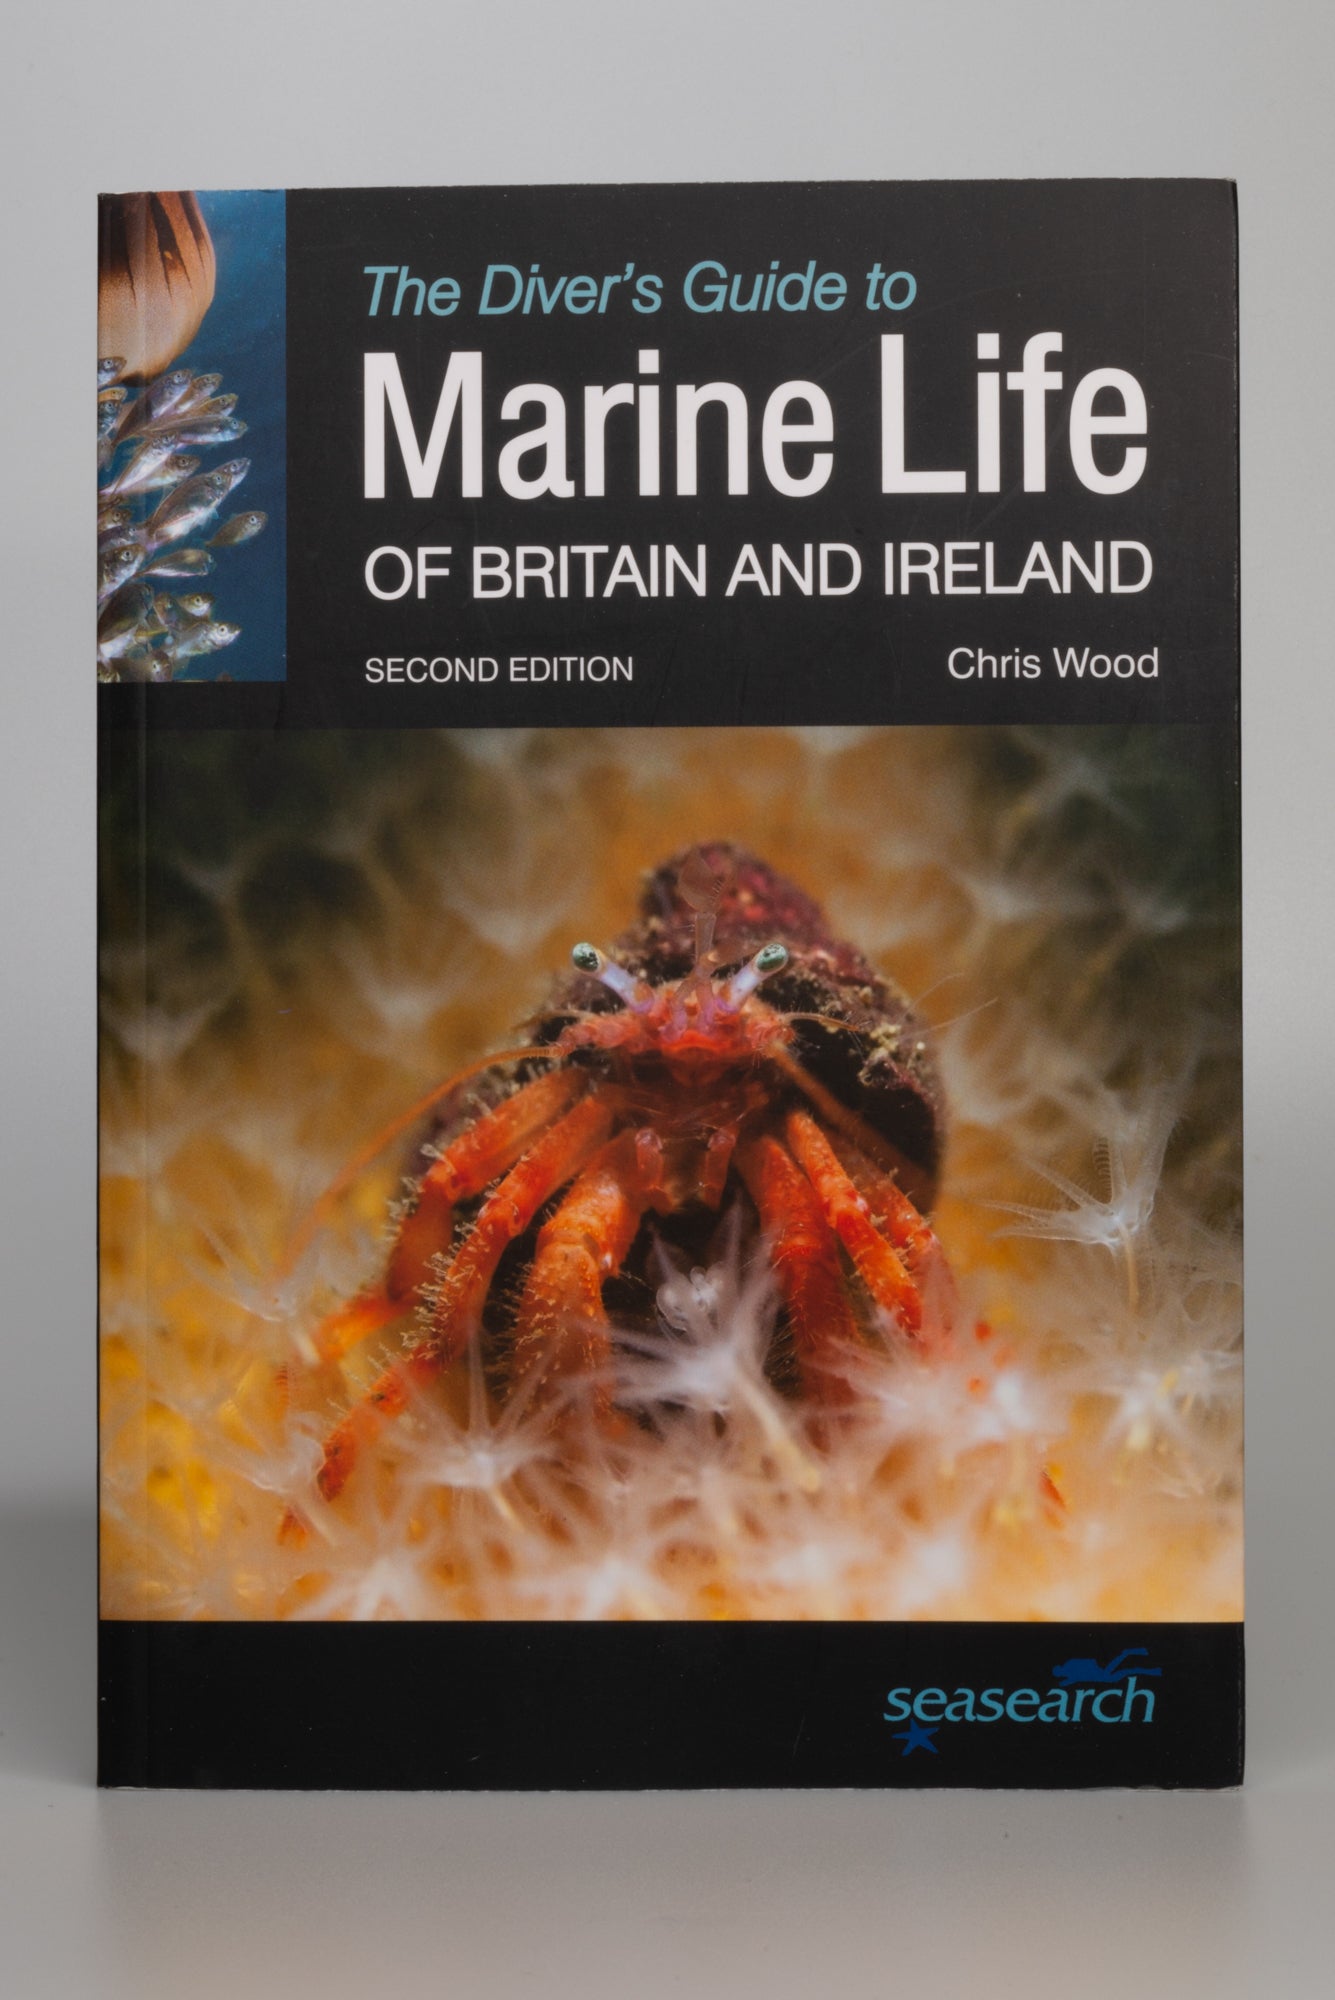 The Diver's Guide to Marine Life of Britain and Ireland